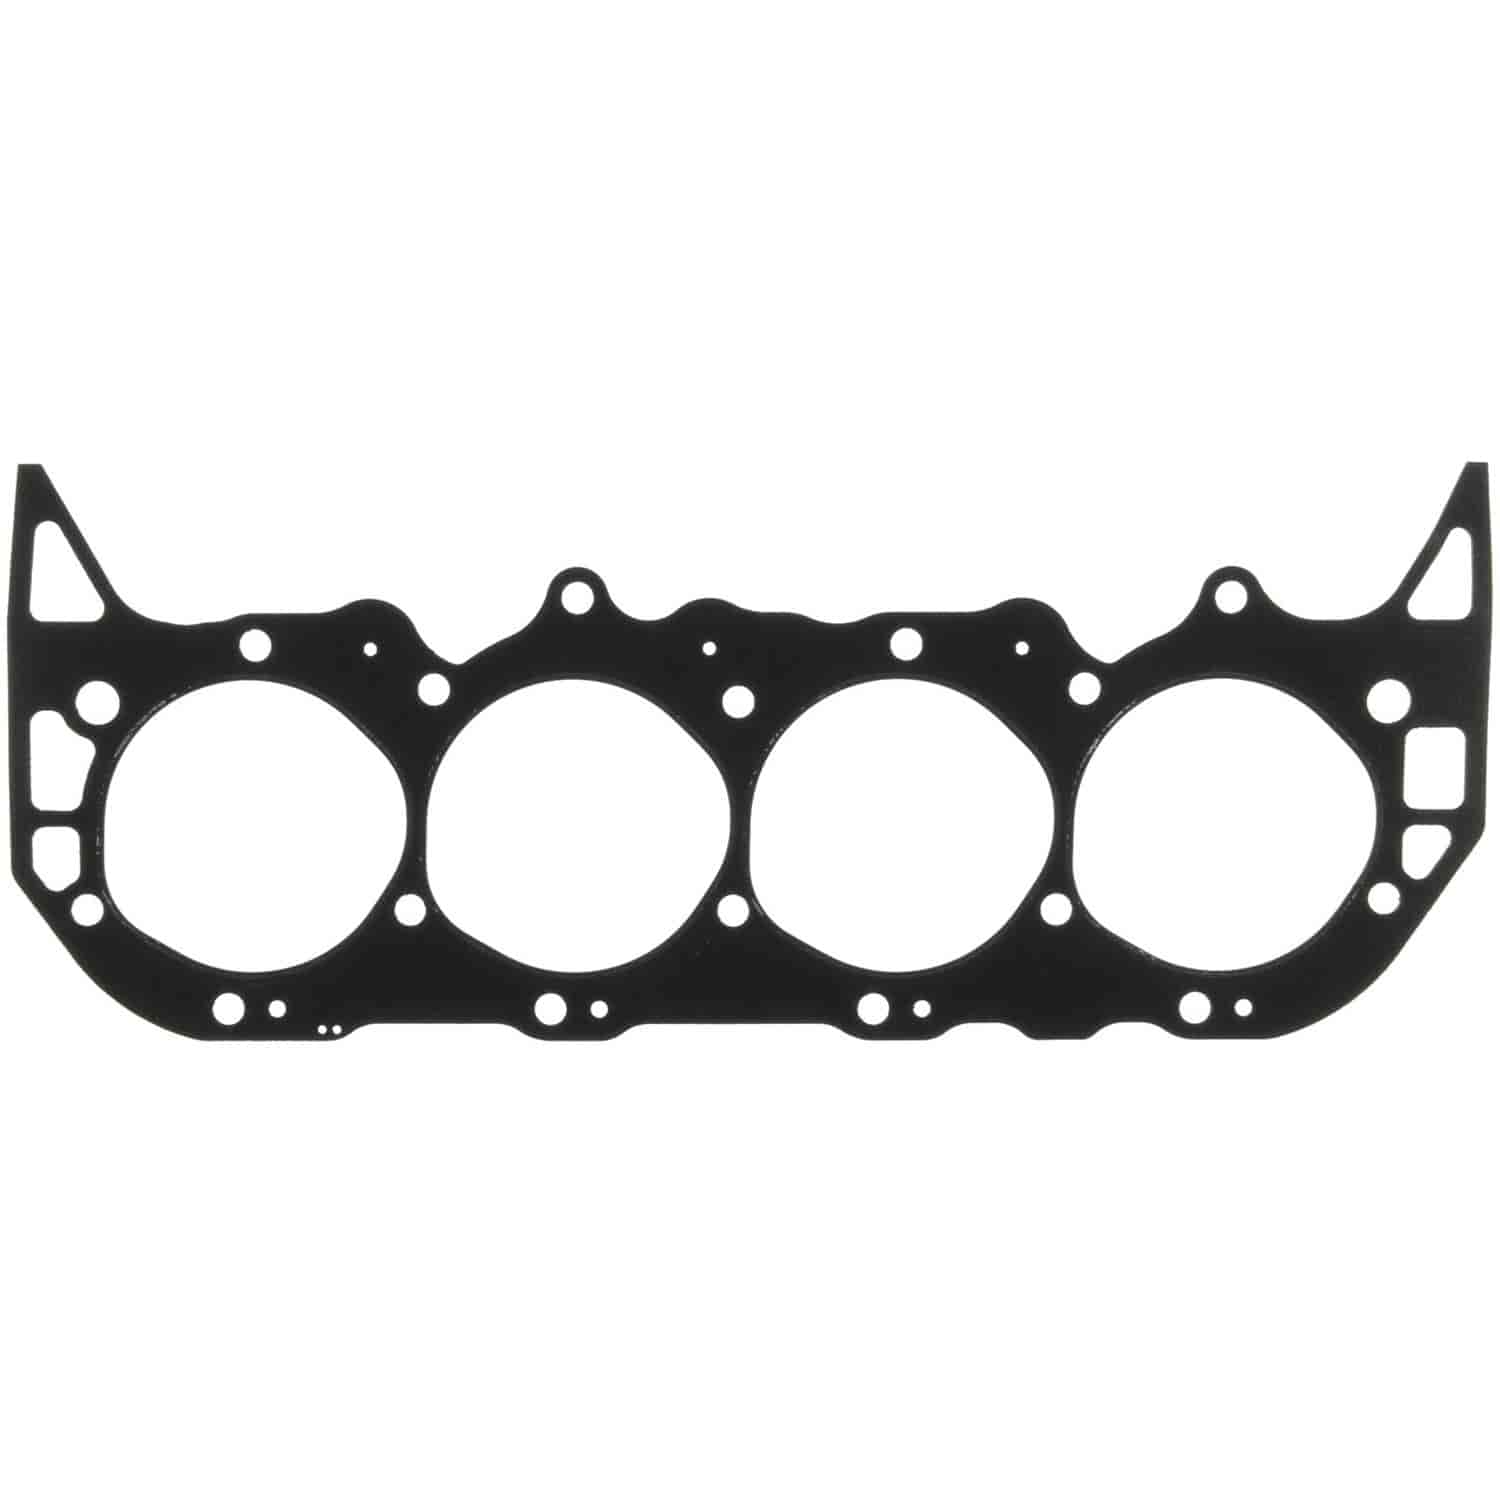 Cylinder Head Gasket Chev-Pass&Trk Can Pont GMC 396 402 427 454 Engs. 65-79 VC